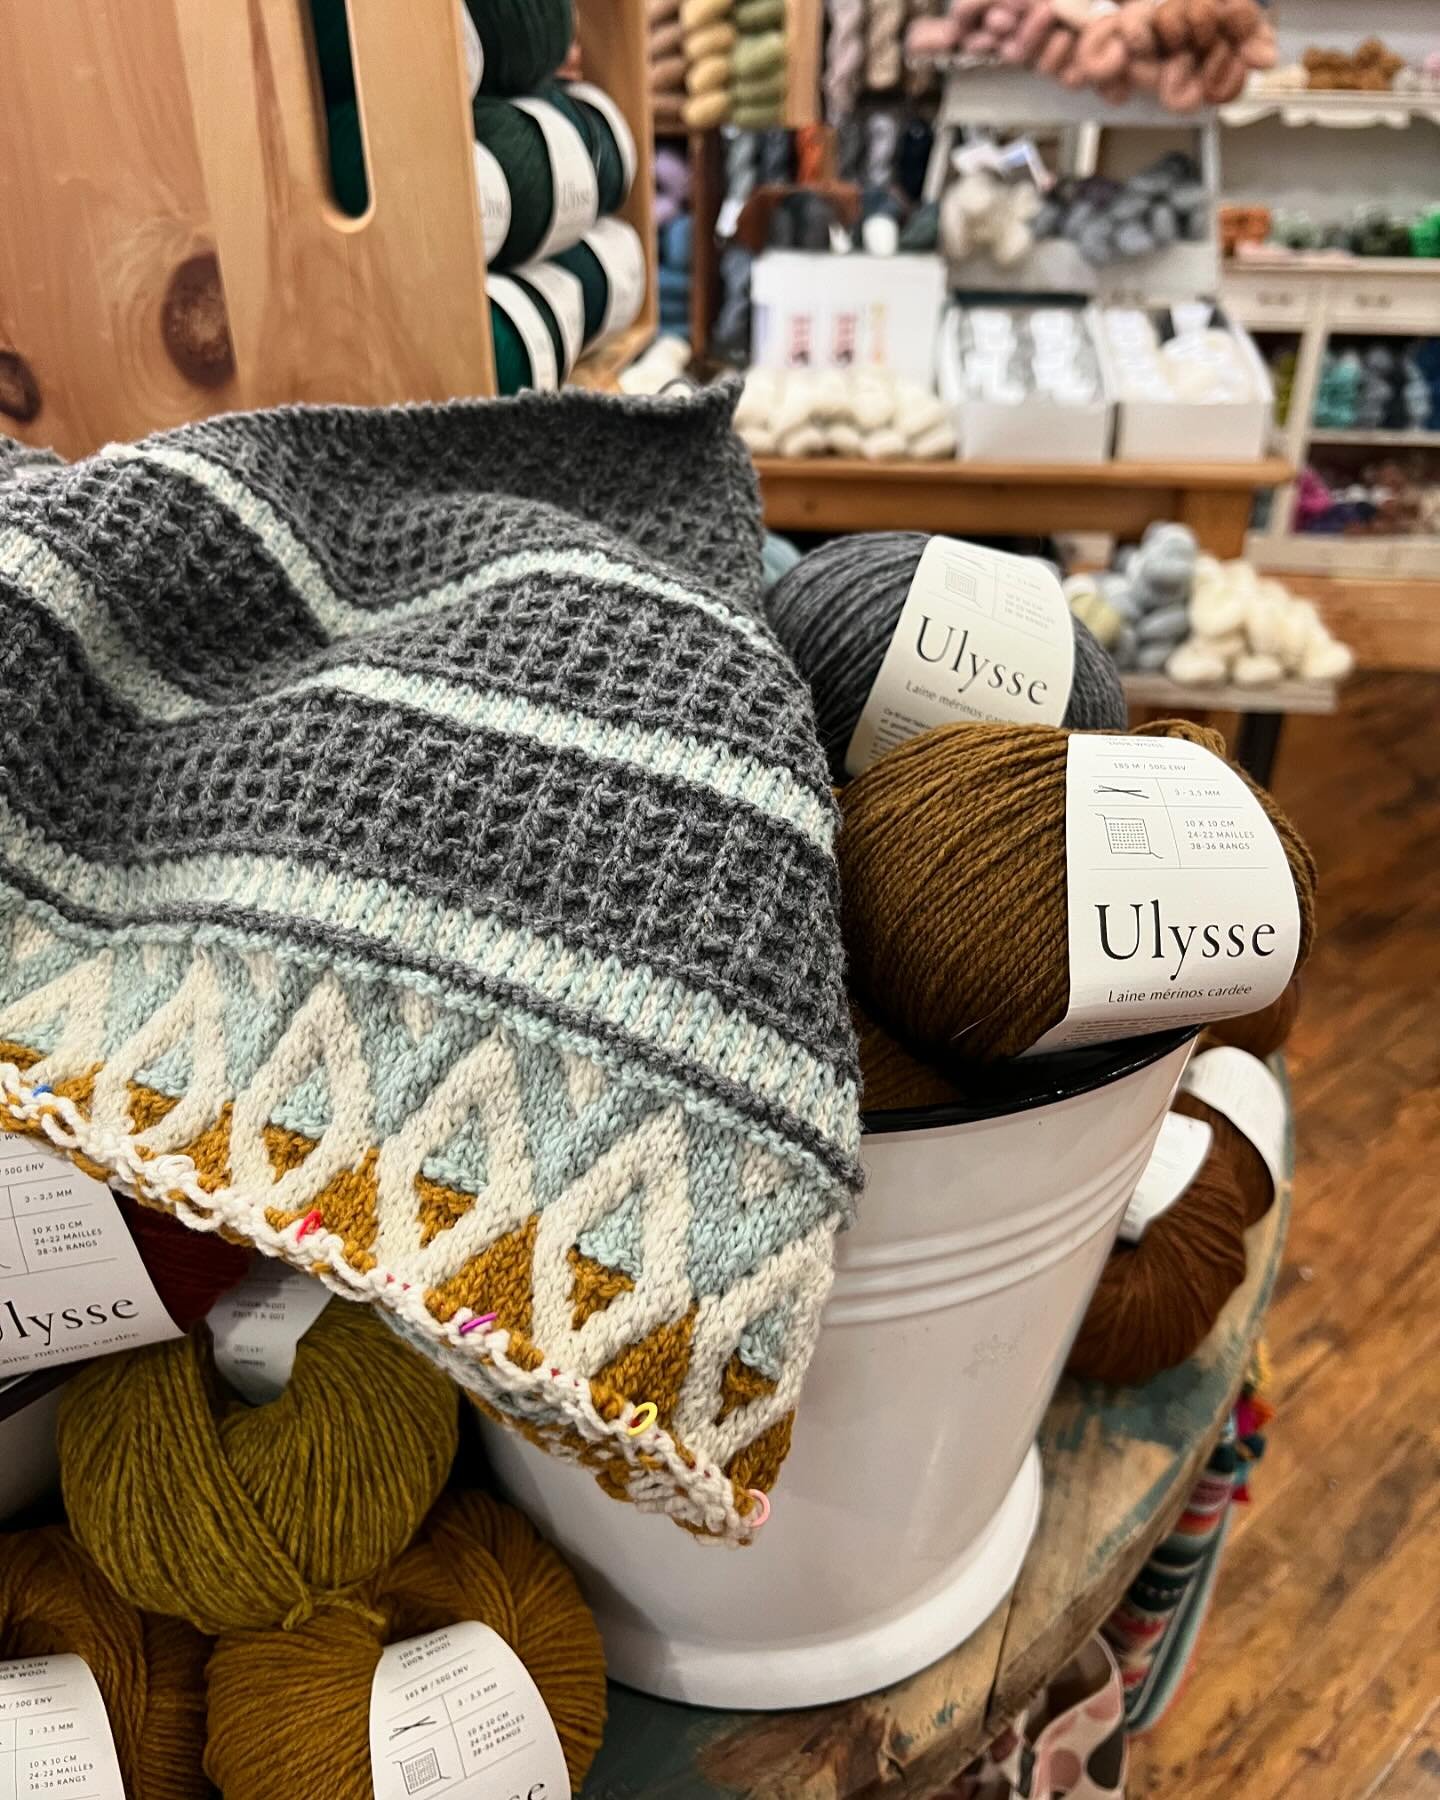 The @dererumnatura Ulysse has been a popular sport weight choice for so many projects lately! We love the hand of this yarn - the little sister to Gilliatt - and these colors are incredible! 

Pattern: Artus by @moonstruck_knits, knit by @mjcremer 

